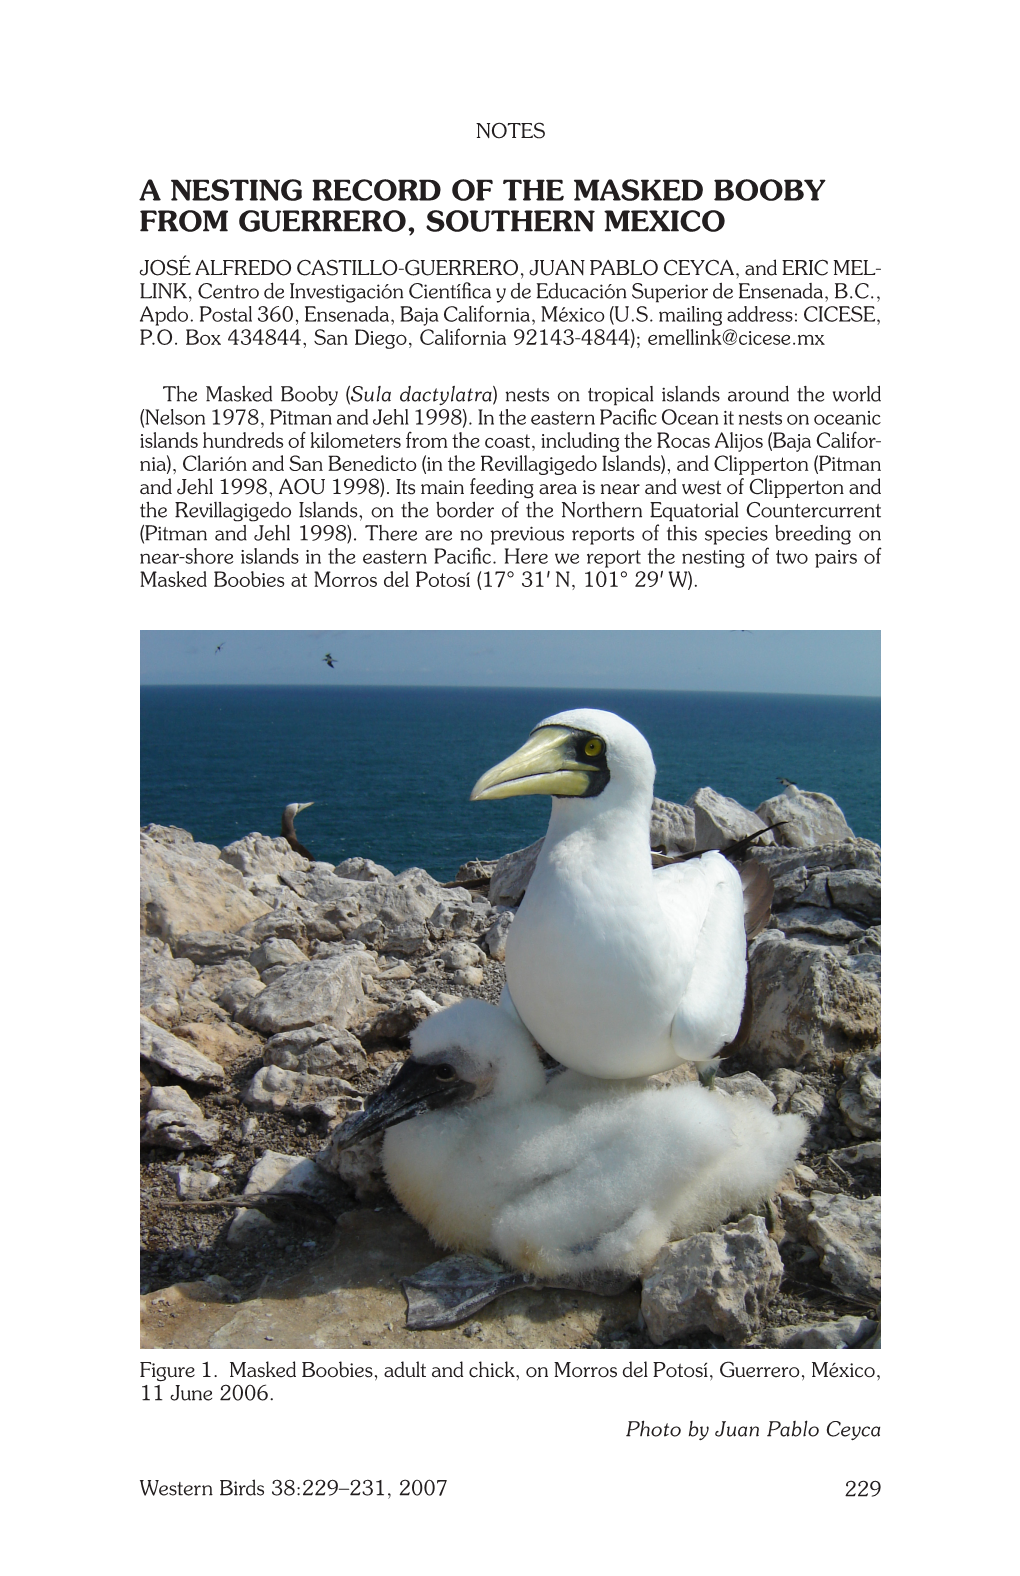 A Nesting Record of the Masked Booby from Guerrero, Southern